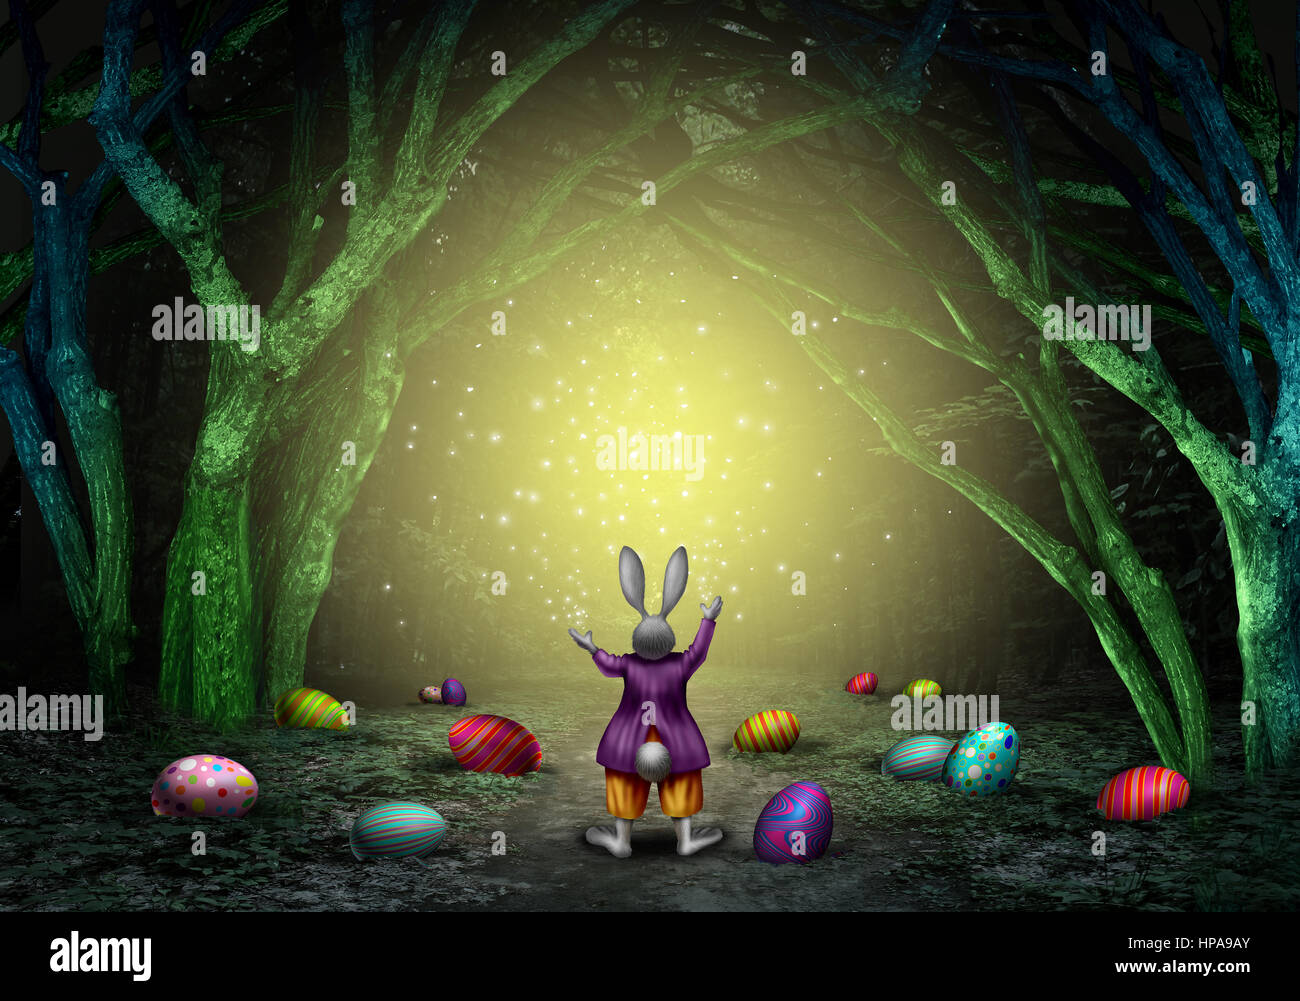 Easter magic bunny rabbit with decorated eggs and sparkles in an enchanted magical forest as a spring holiday symbol with 3D illustration elements. Stock Photo